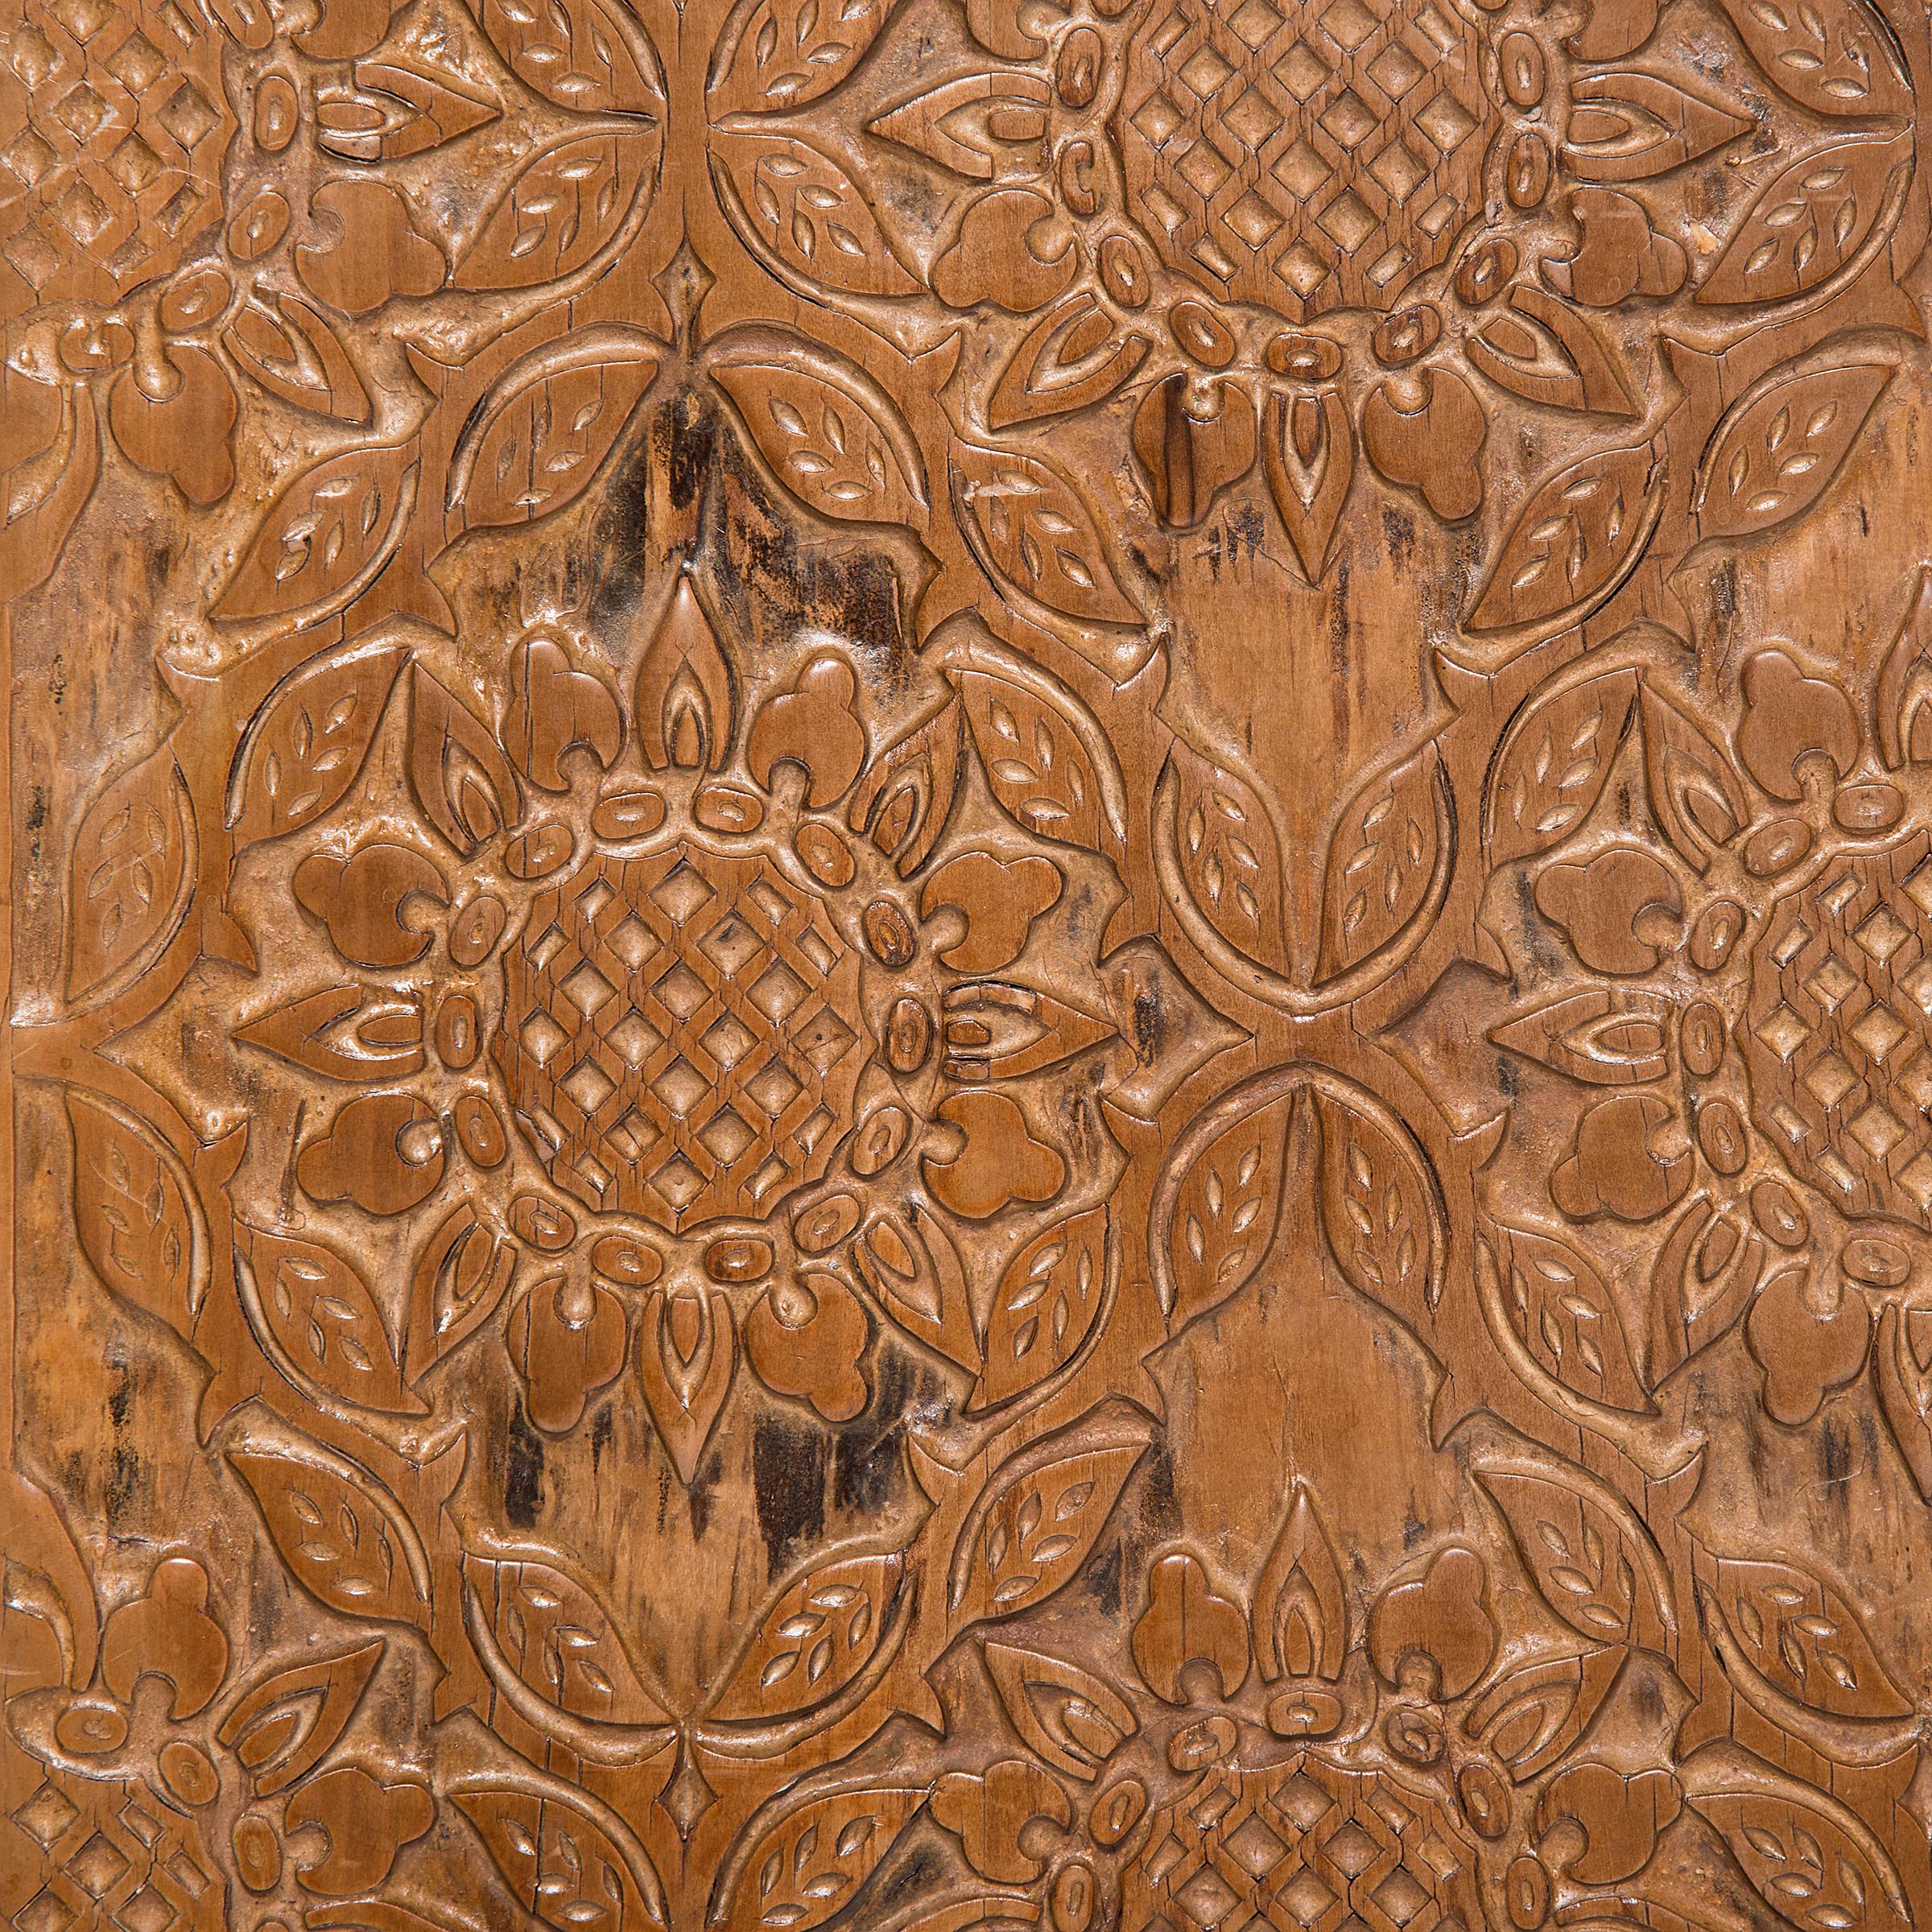 Centuries before Gutenberg's printing press, China was developing and perfecting printing processes that remain popular today. This turn-of-the-century printing block from China's Shanxi province finds new life as a beautifully carved wall